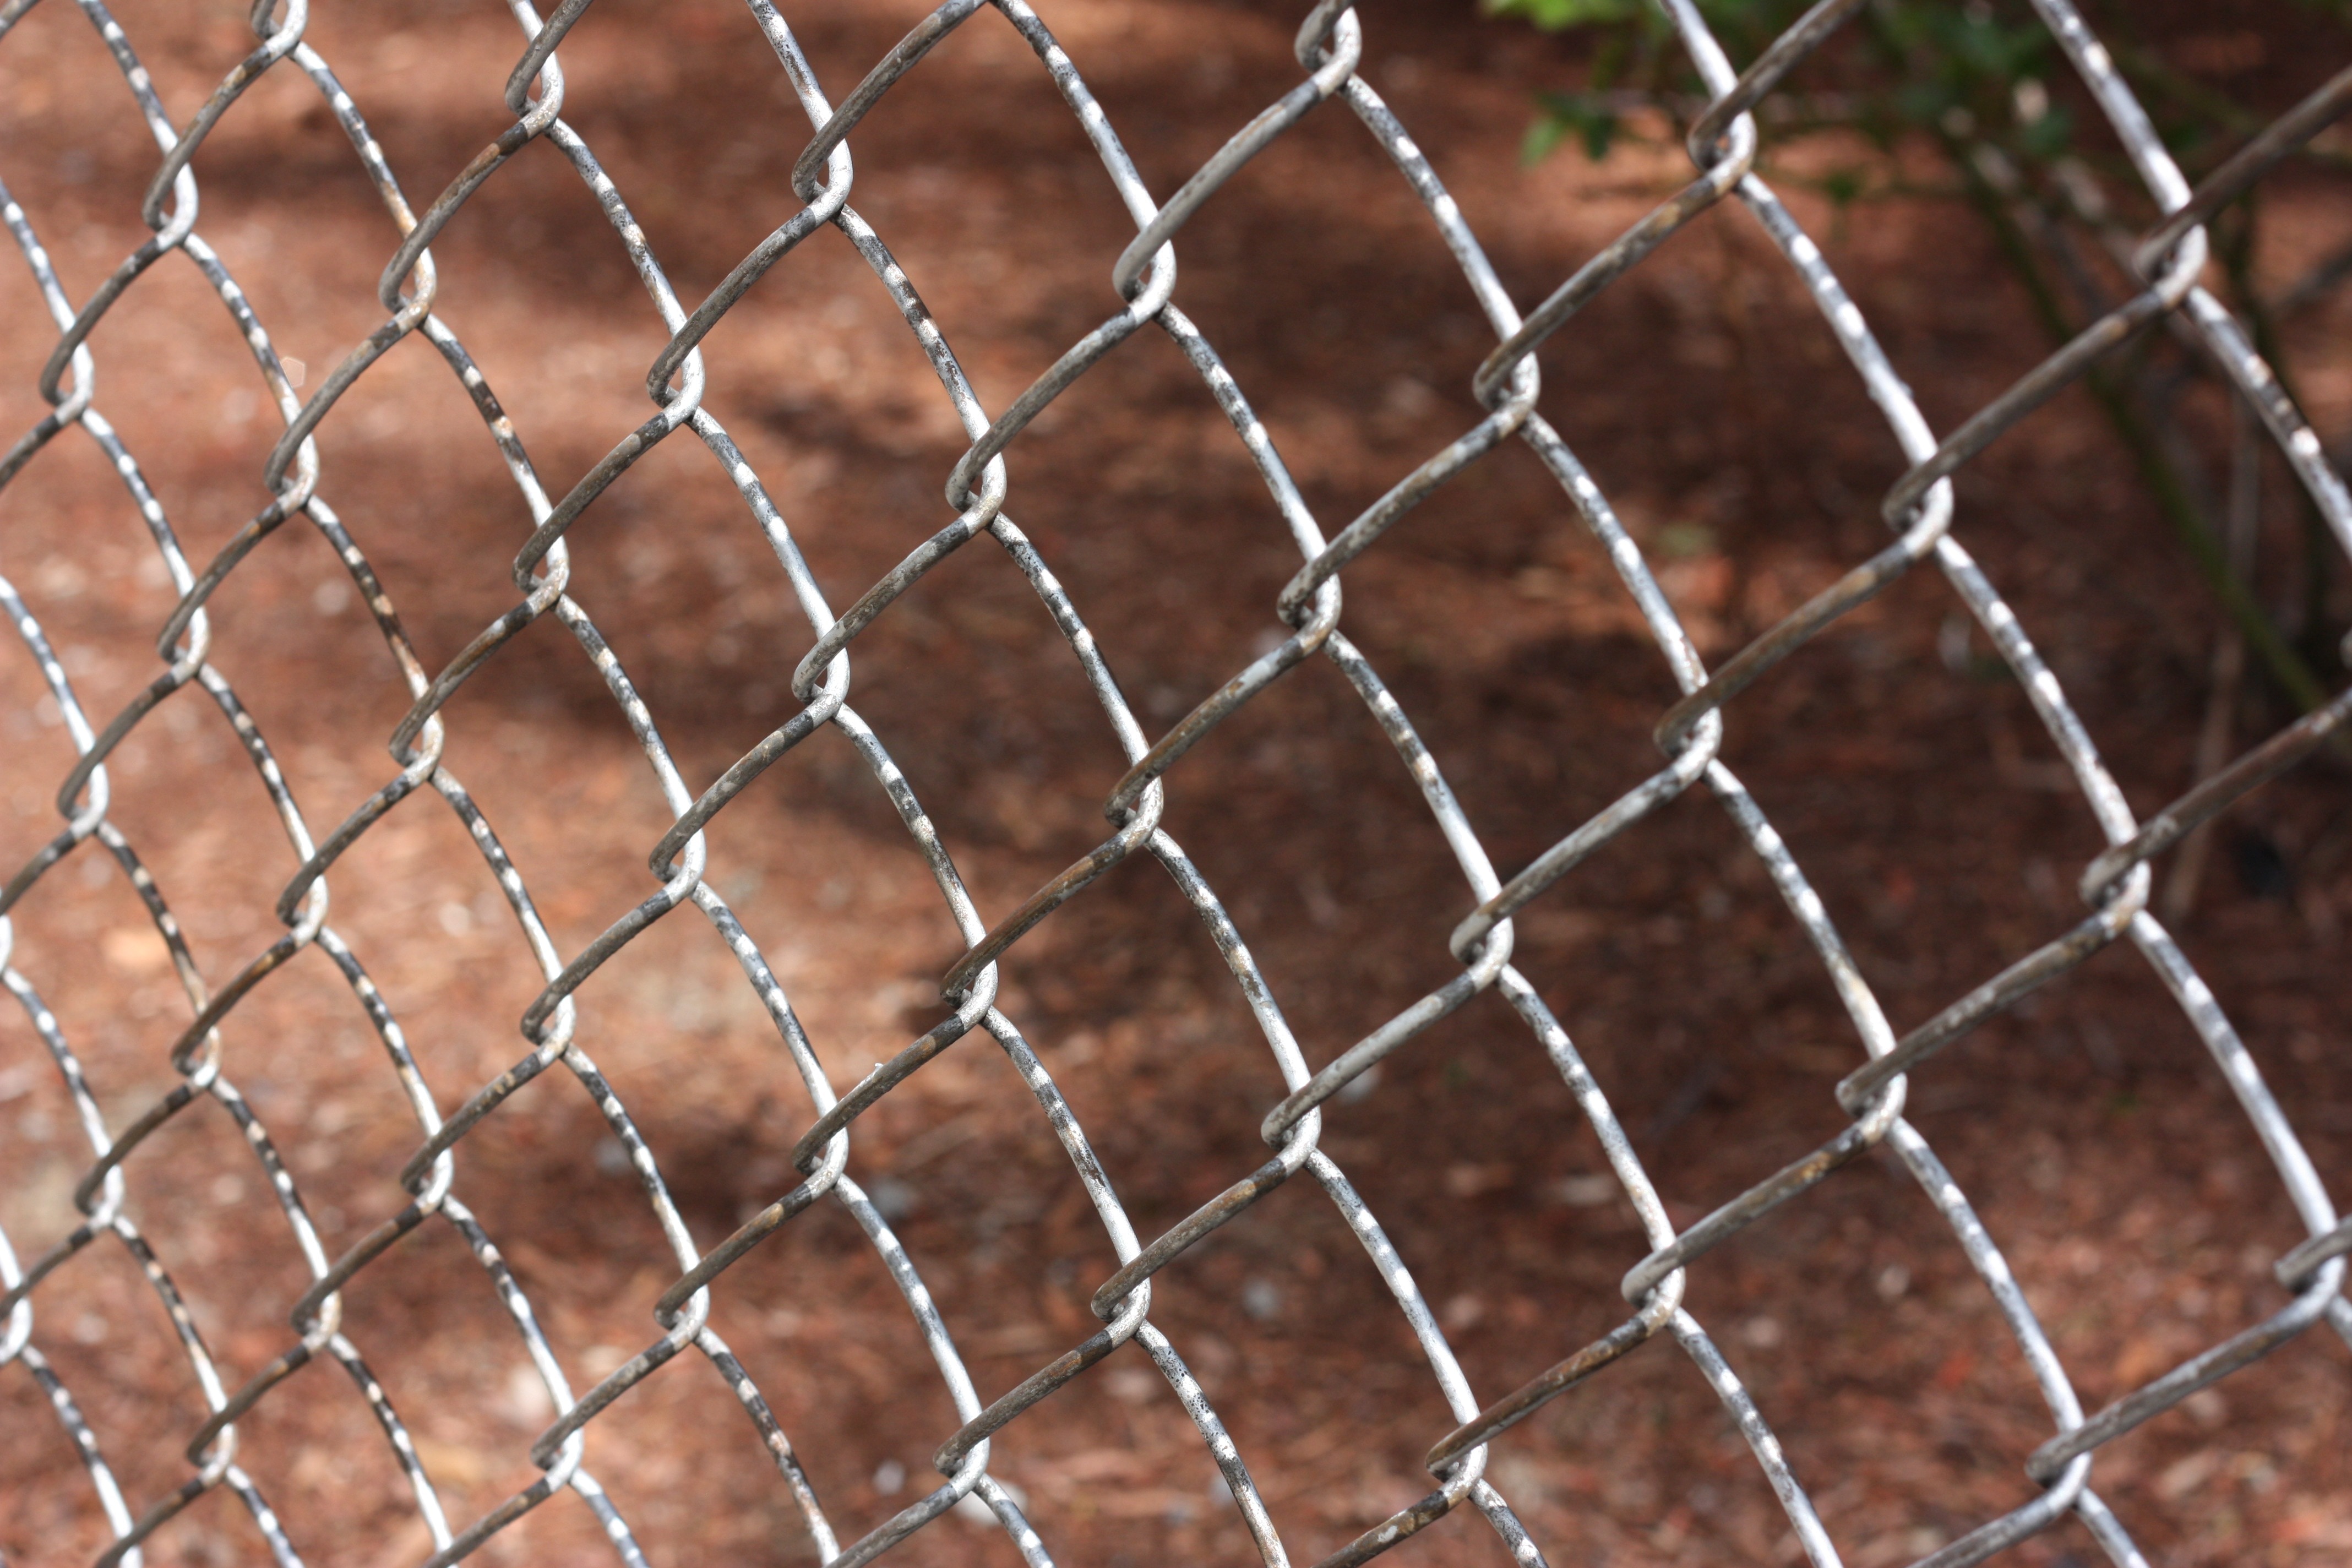 gray metal chain link fence